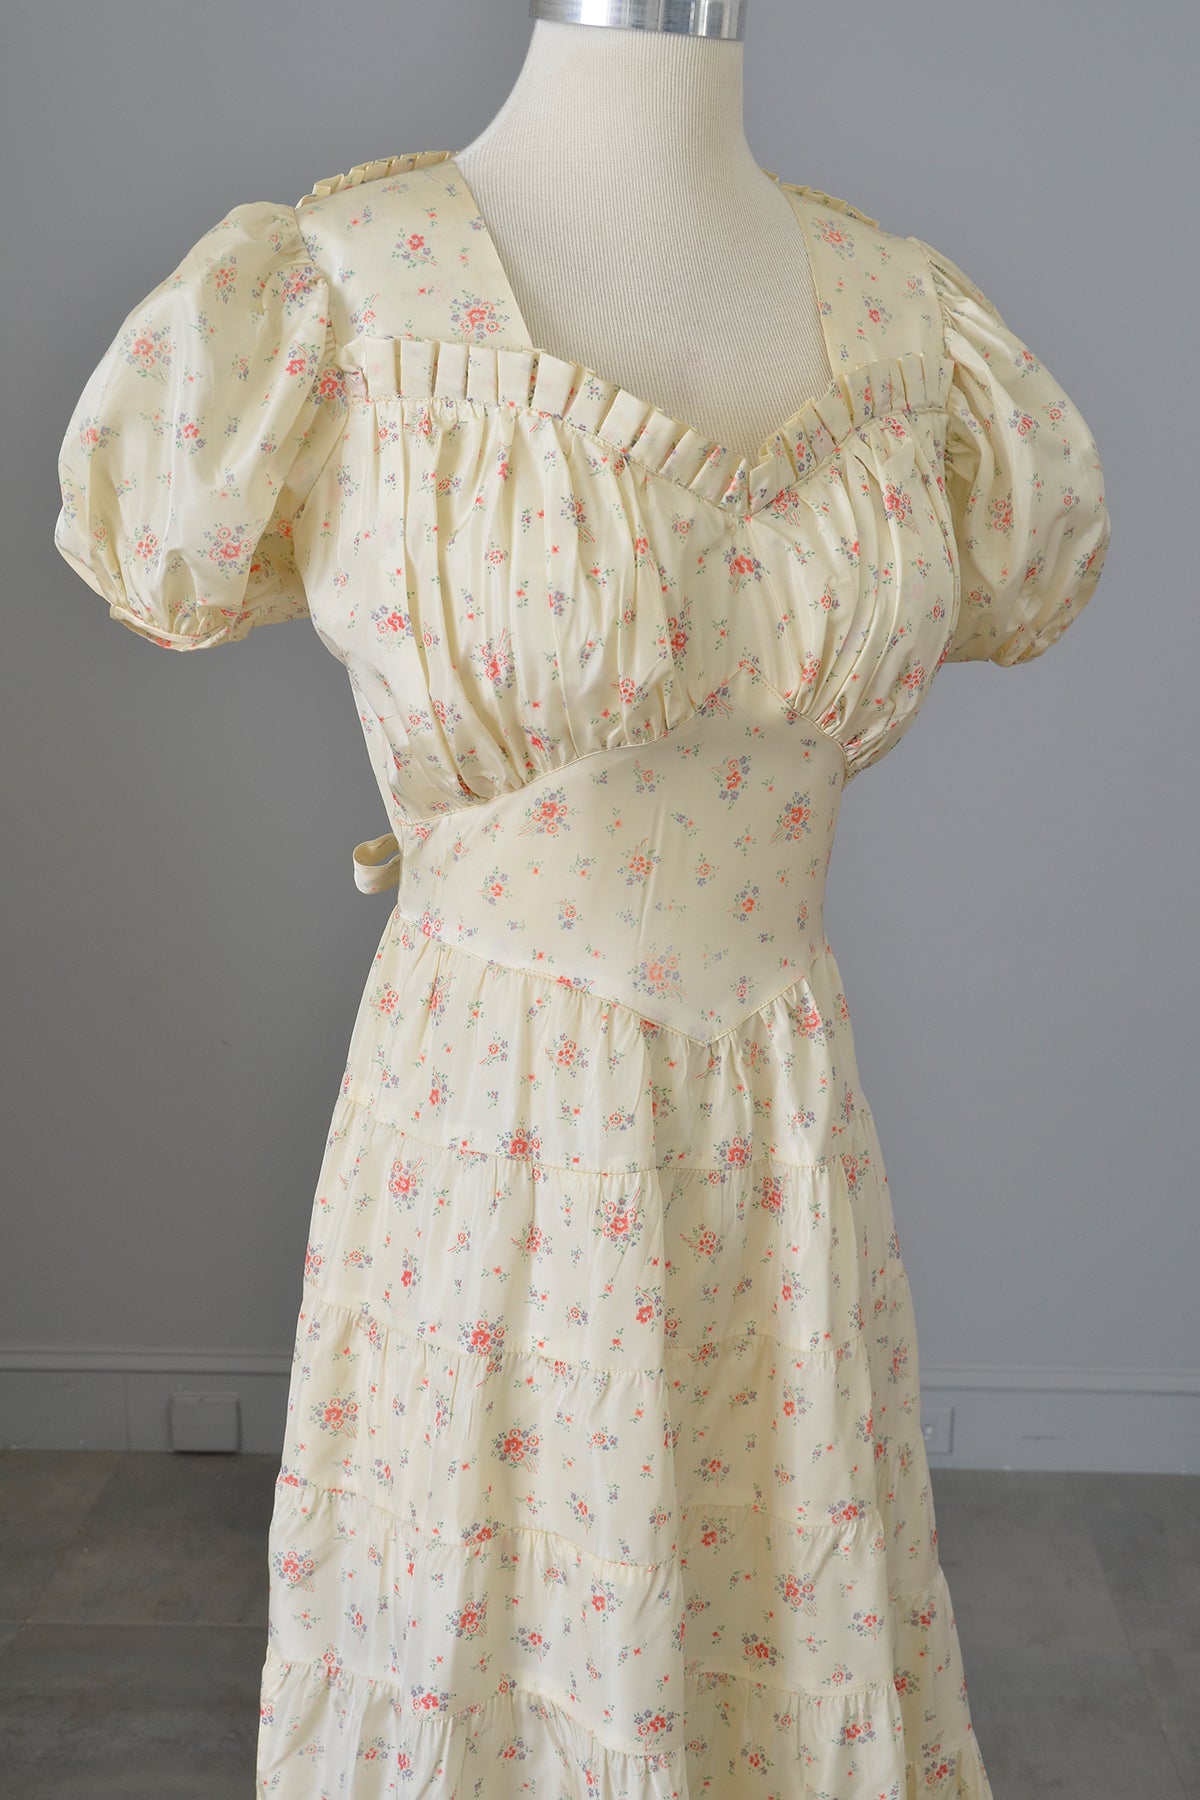 1930's Peasant Dress Tiny Flowers, Puff Sleeves, Full Tiered Skirt | Cottagecore Dress